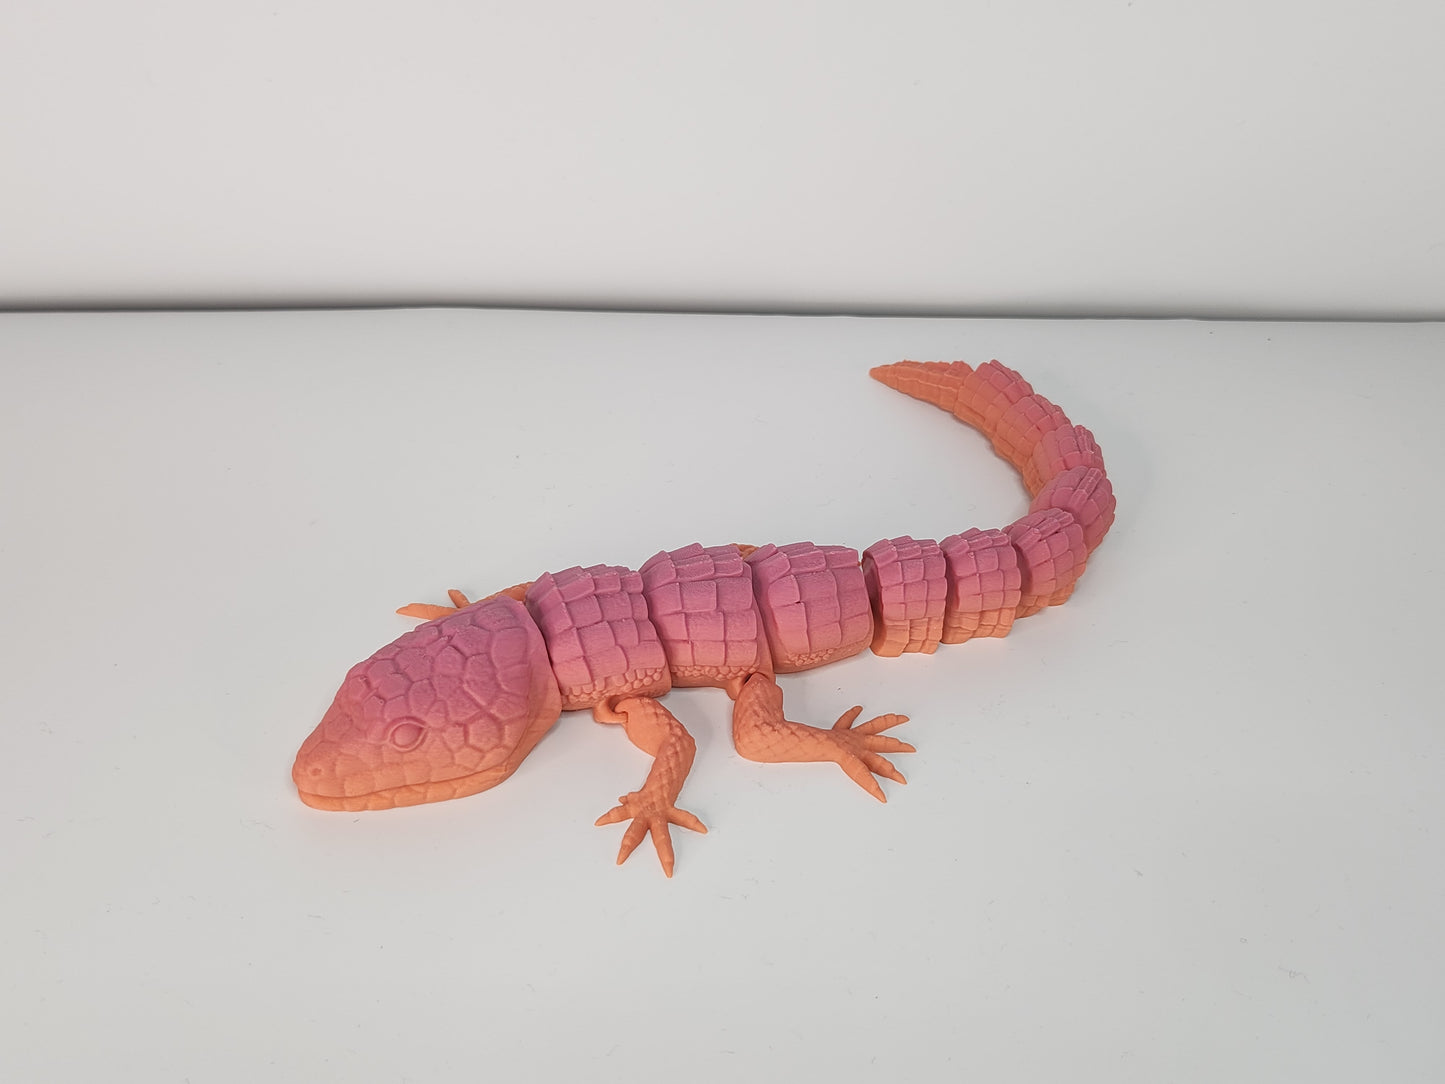 3D Printed Lizards and Snakes